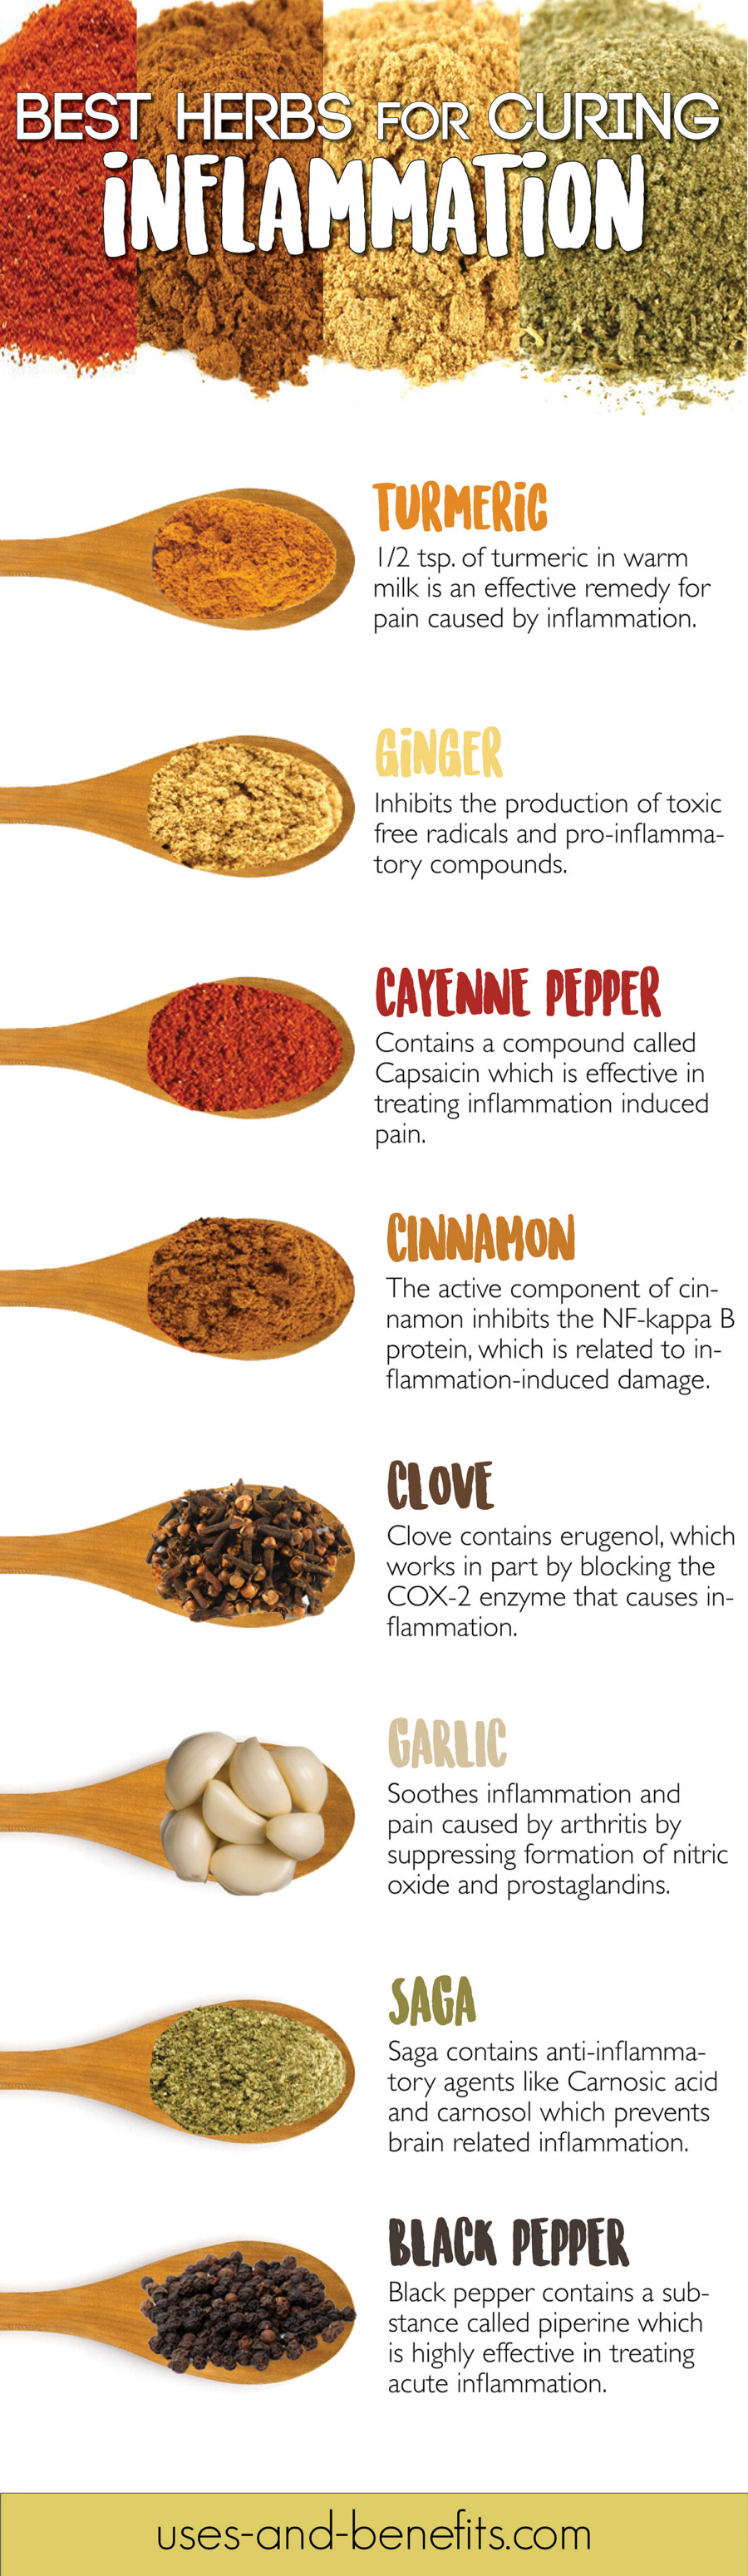 herbs for inflammation